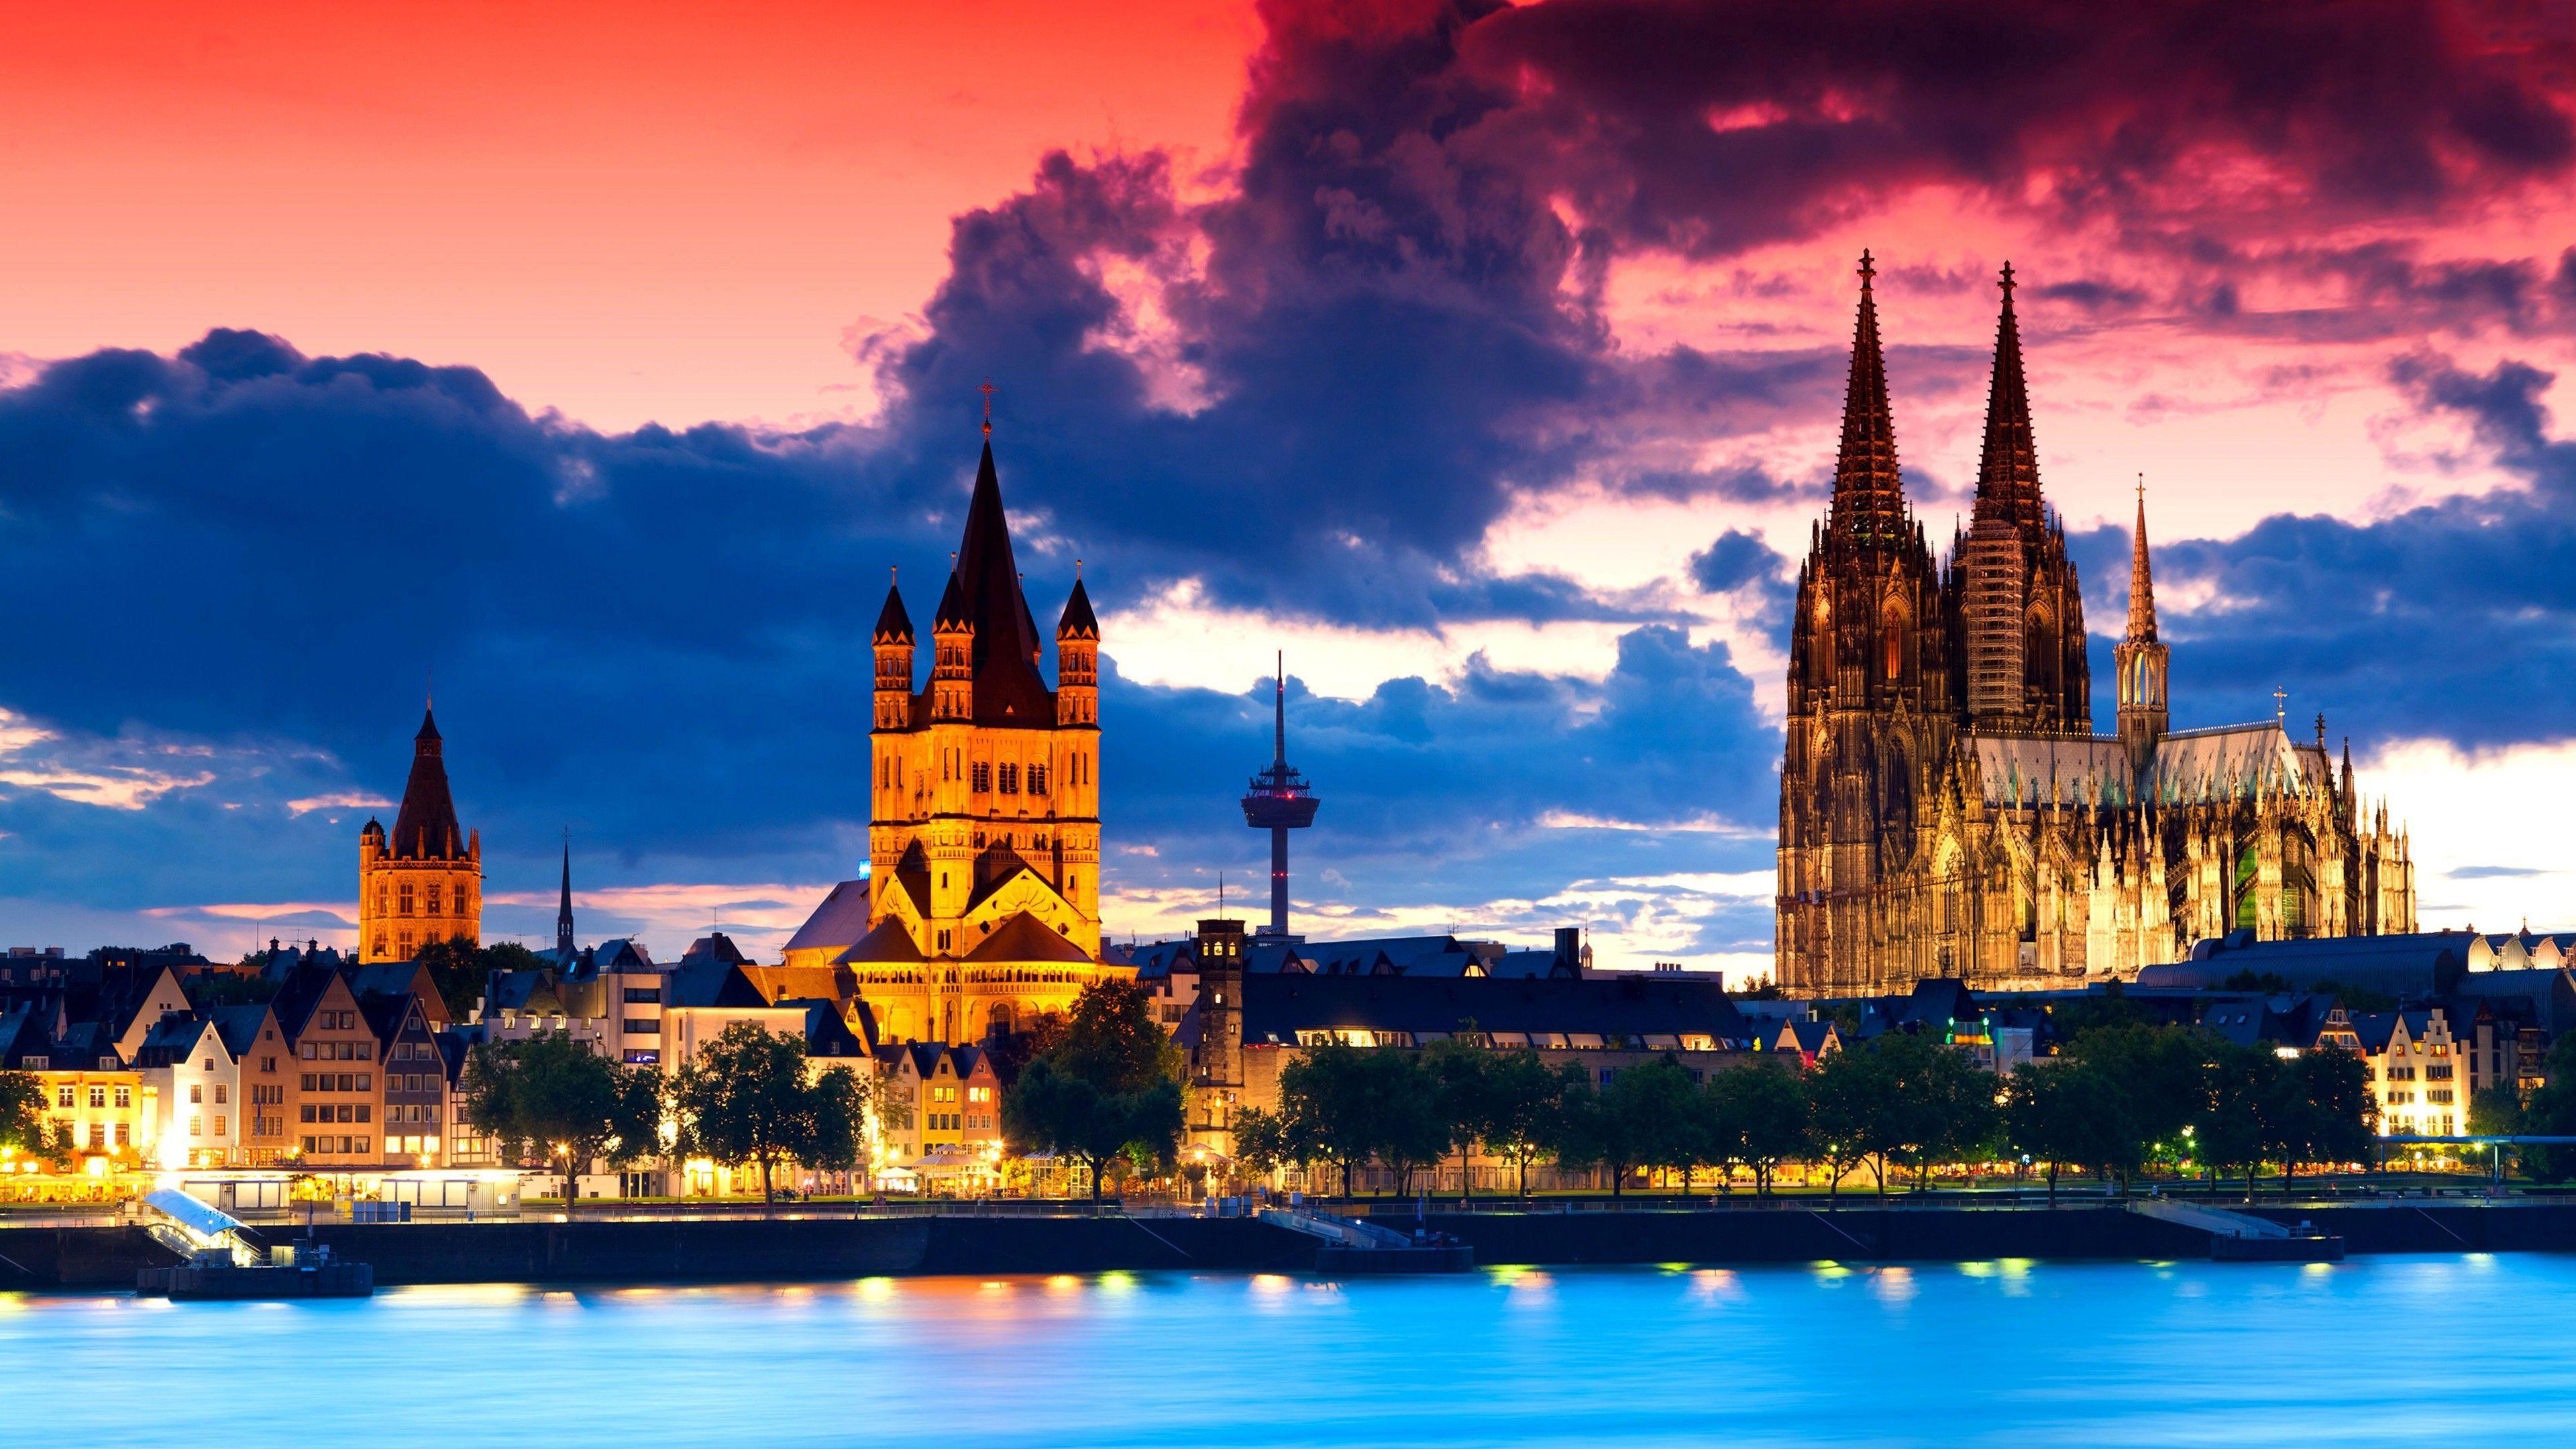 Details about   Cologne Germany Sunset  HD POSTER